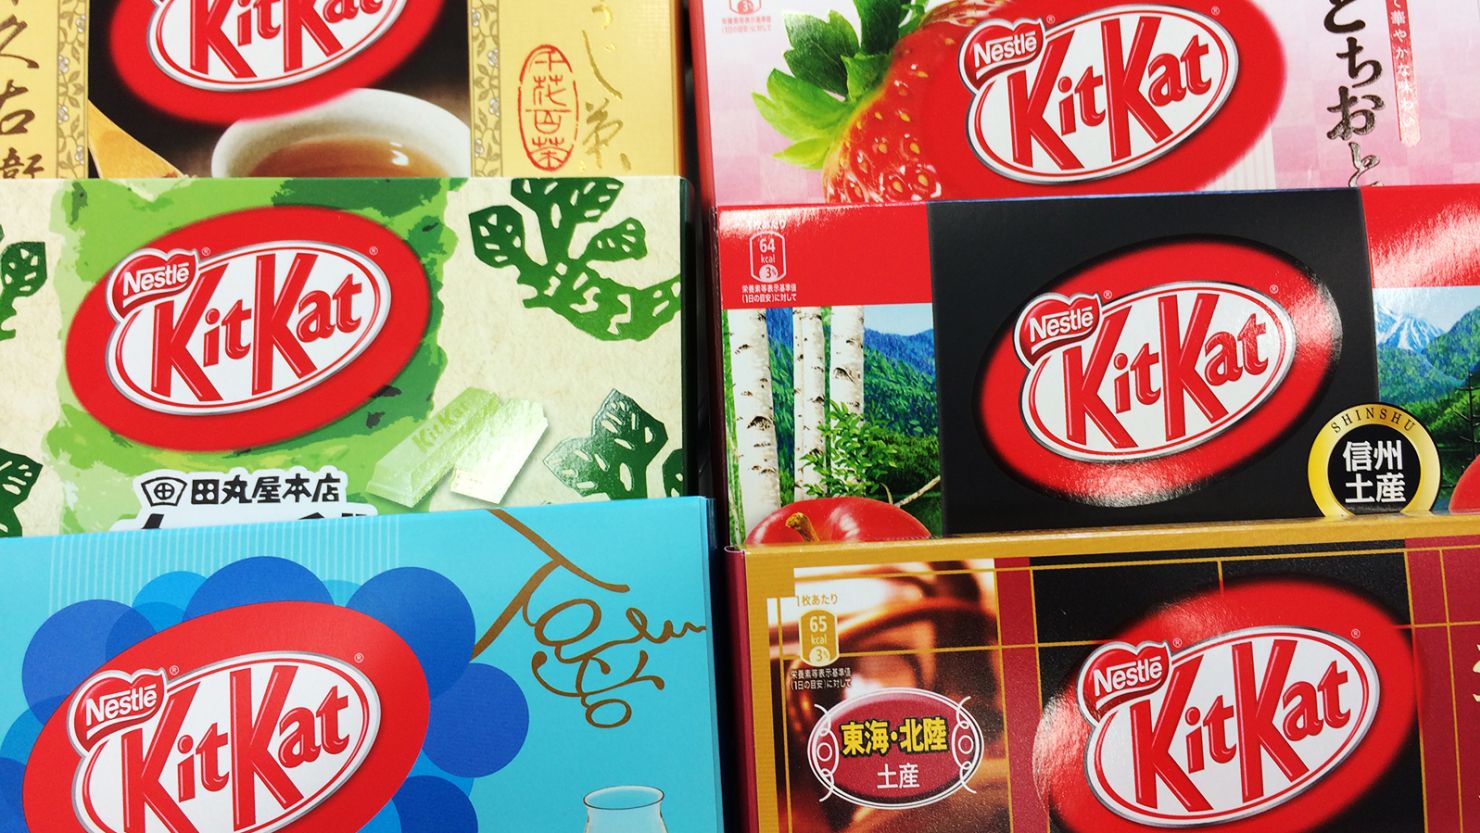 KitKat launches brand new bakery-inspired flavor and fans say it